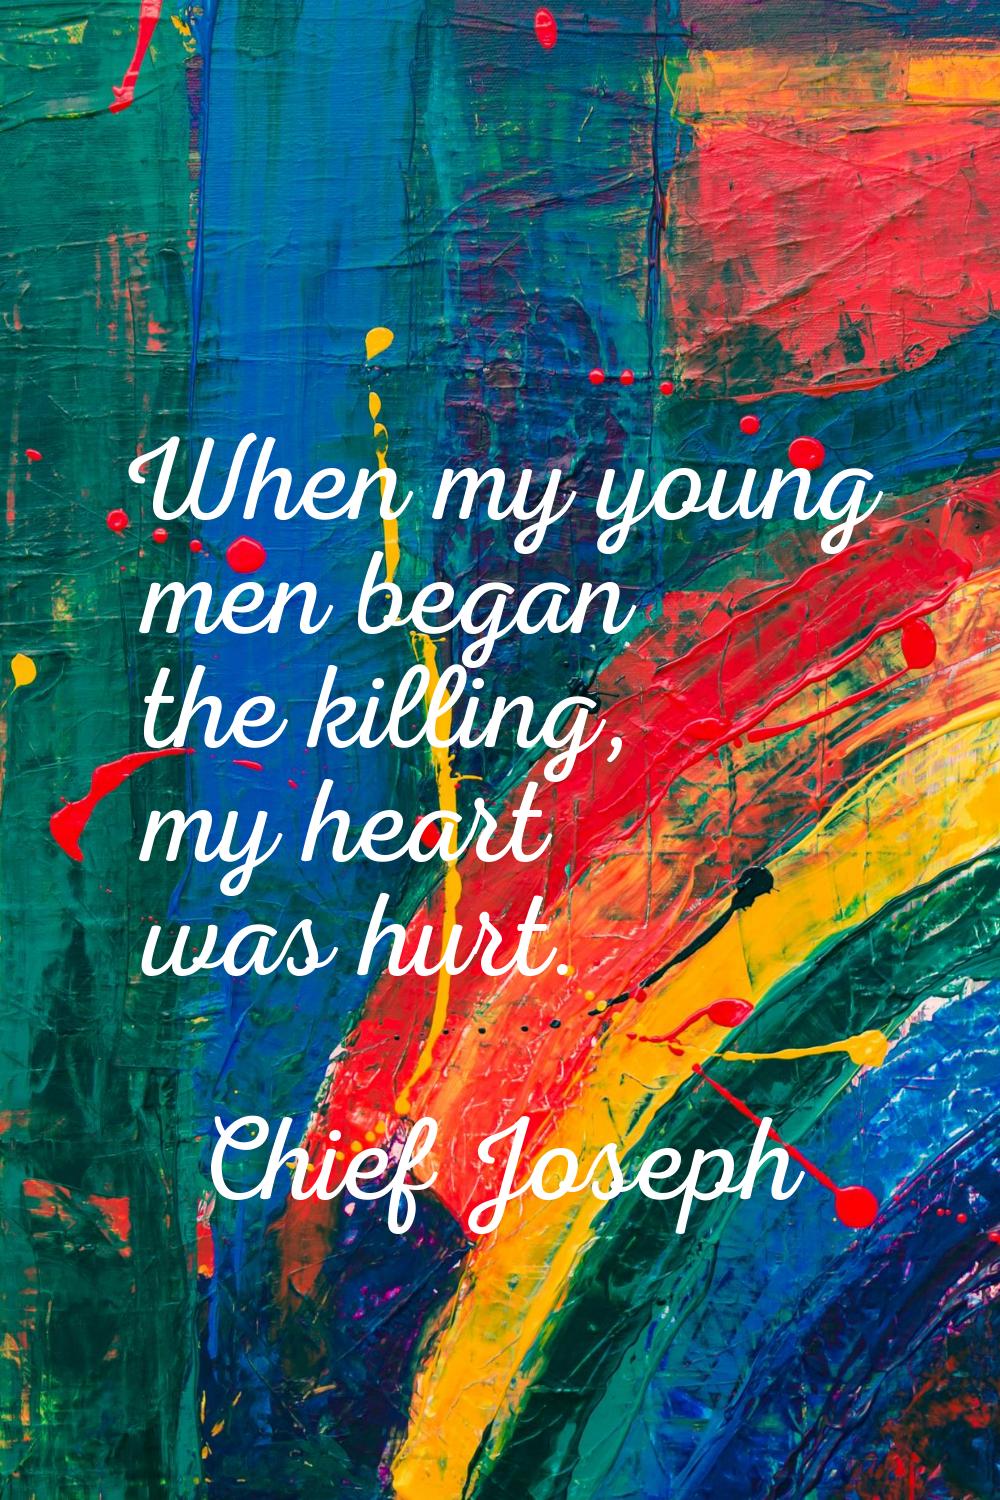 When my young men began the killing, my heart was hurt.